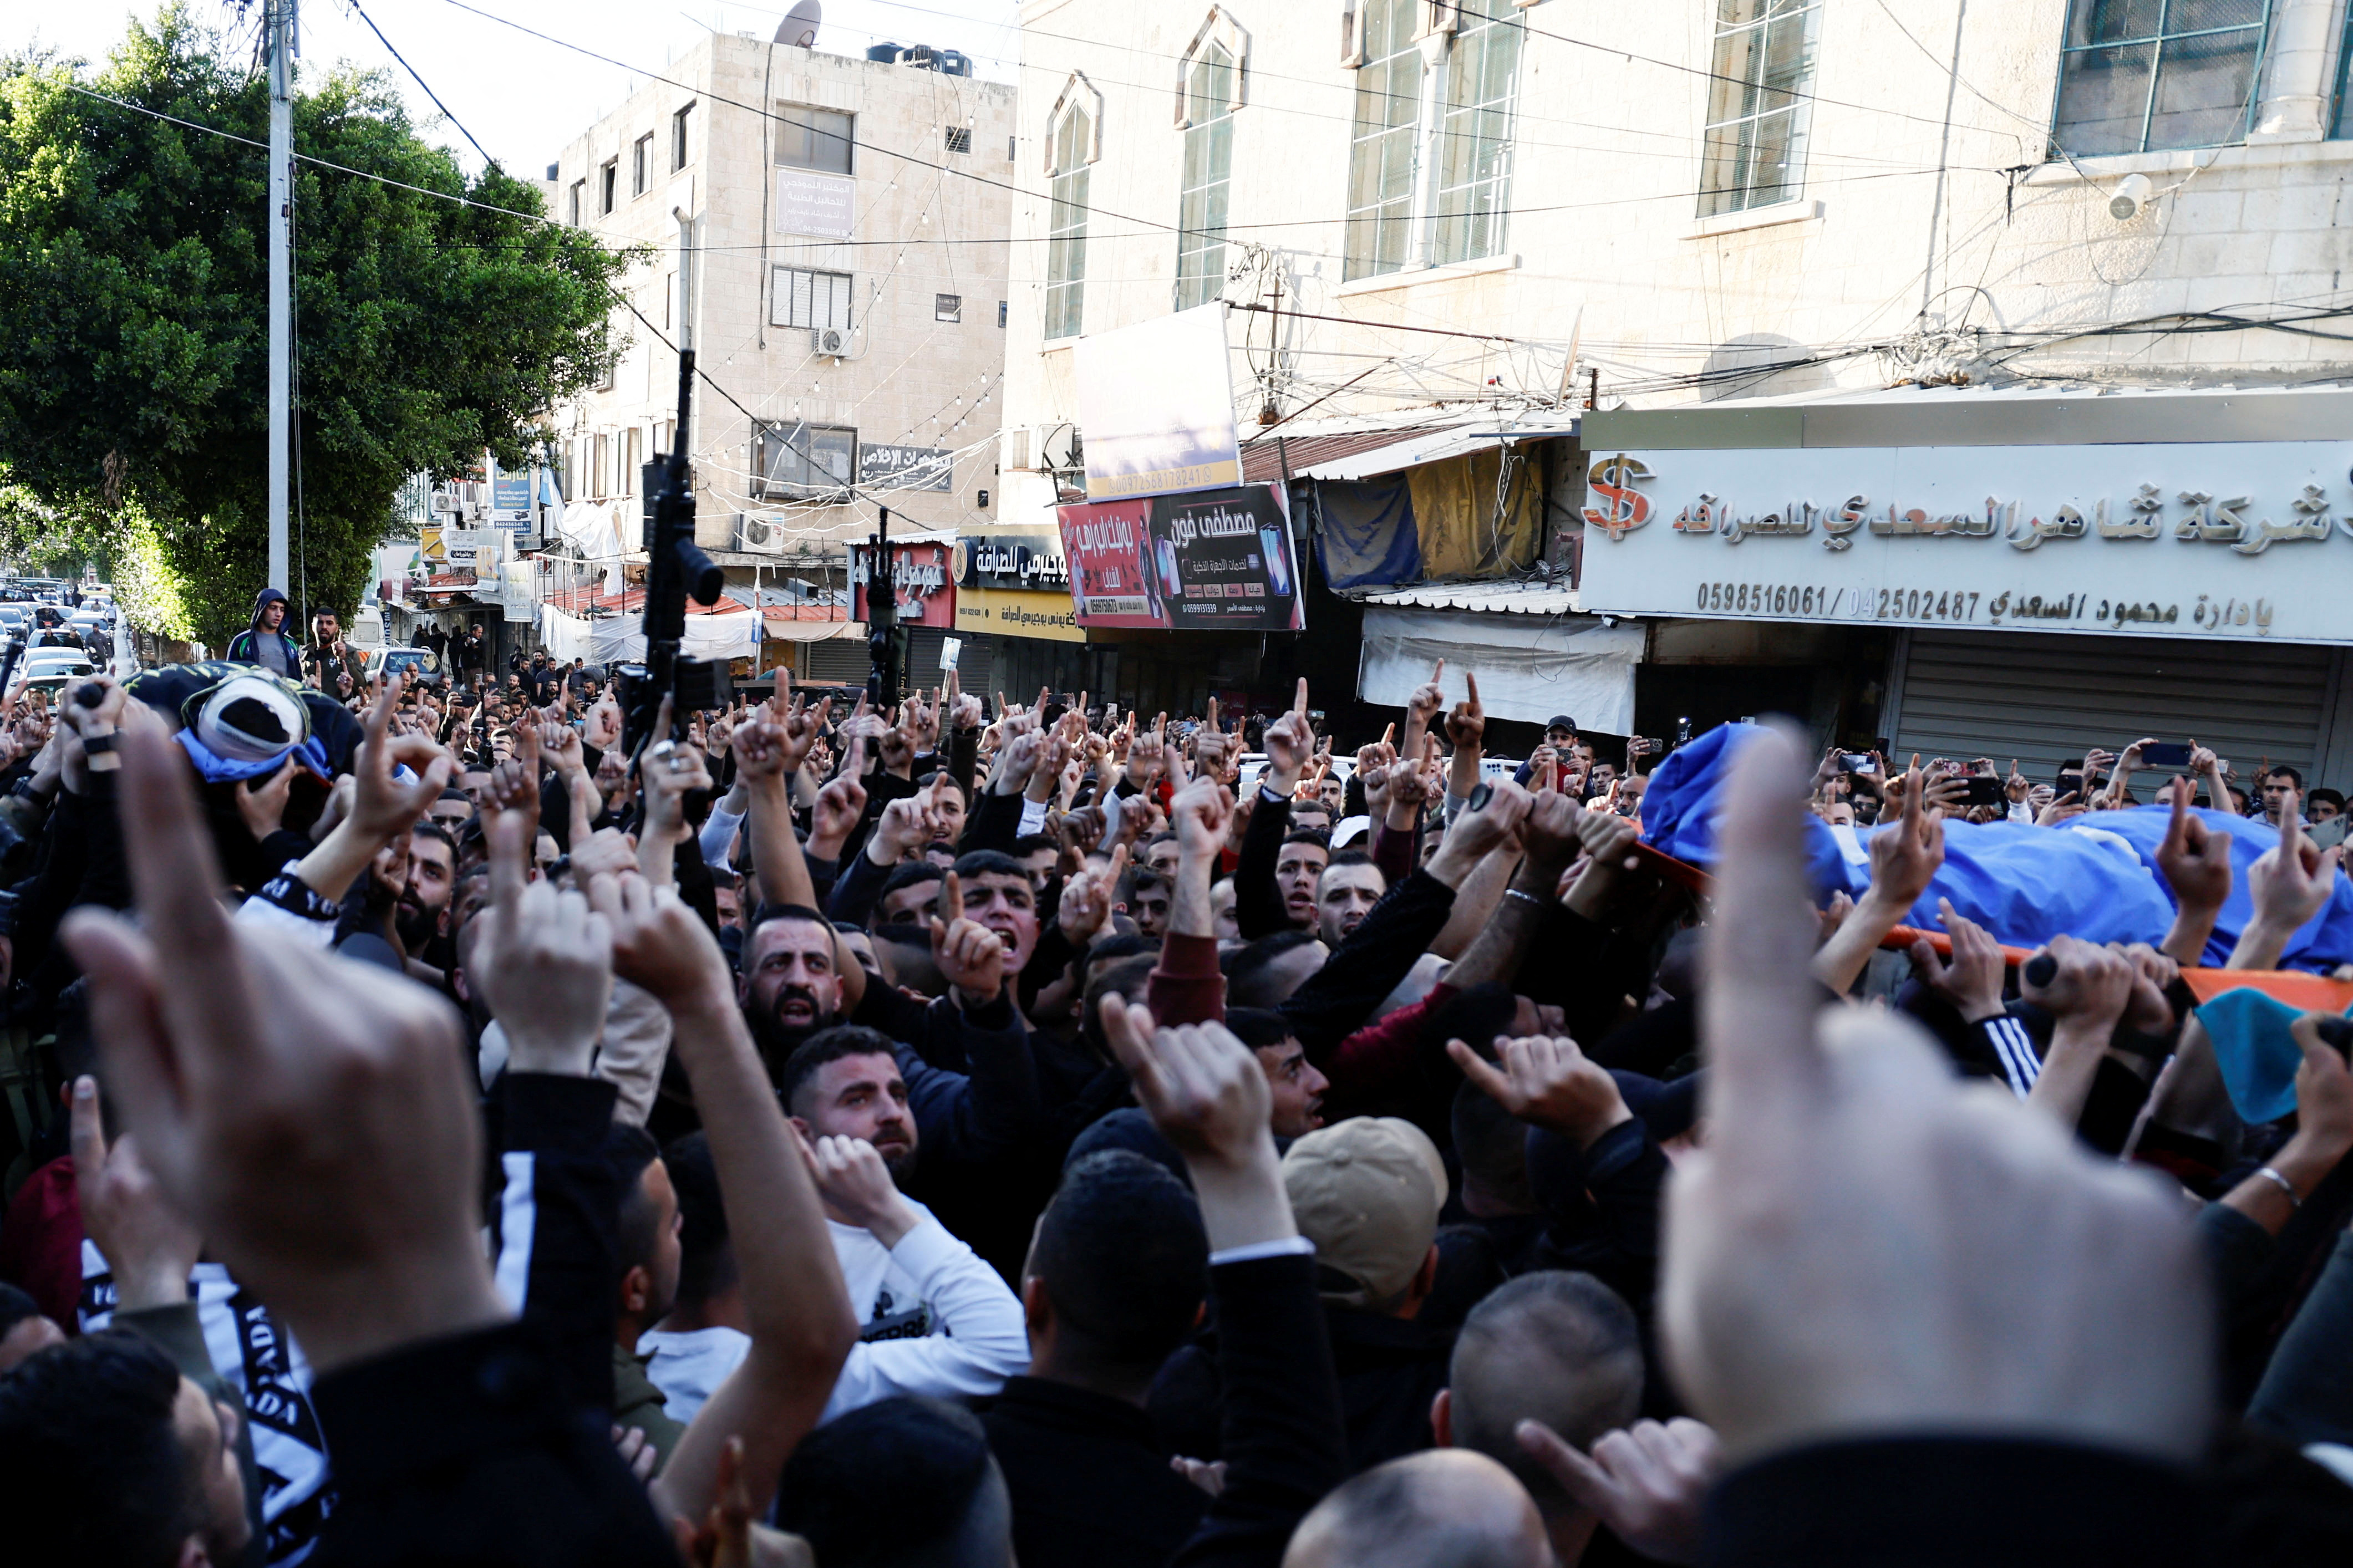 Mourners carry the bodies of Palestinians who were killed during a raid by undercover Israeli forces in Jenin